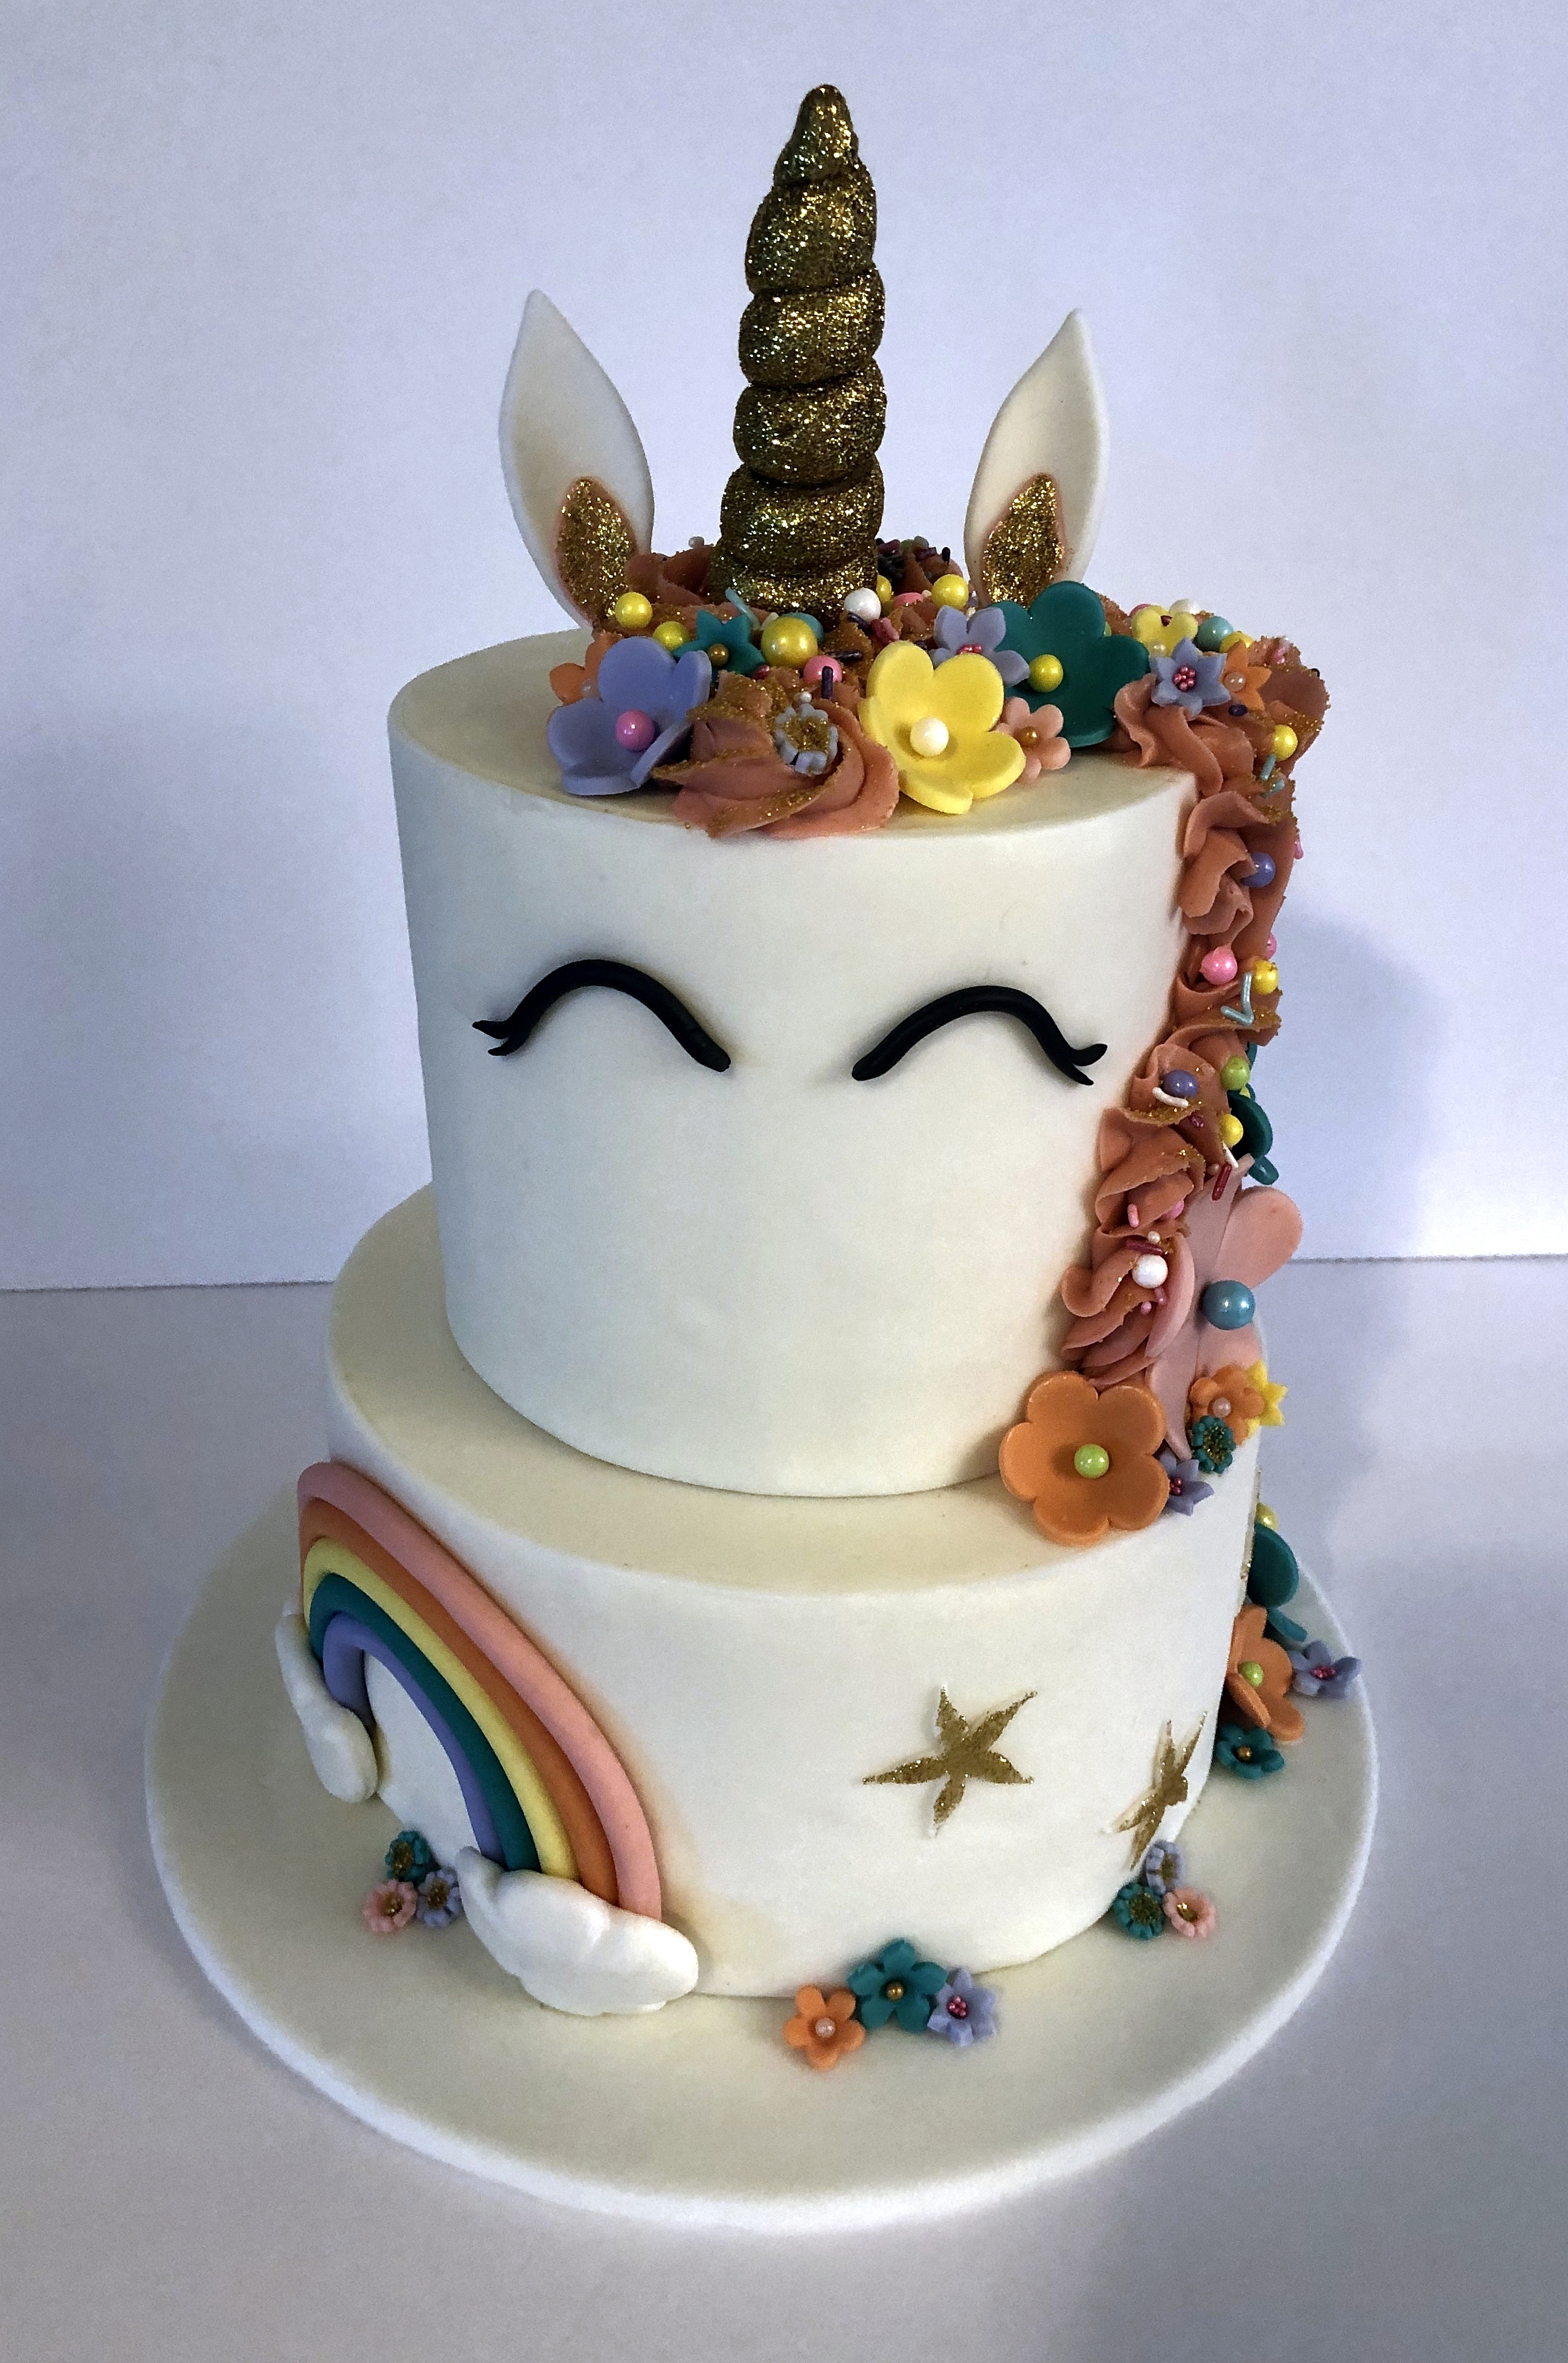 A unicorn themed 2-tier custom birthday cake with buttercream details from Village Patisserie in Toledo, Ohio